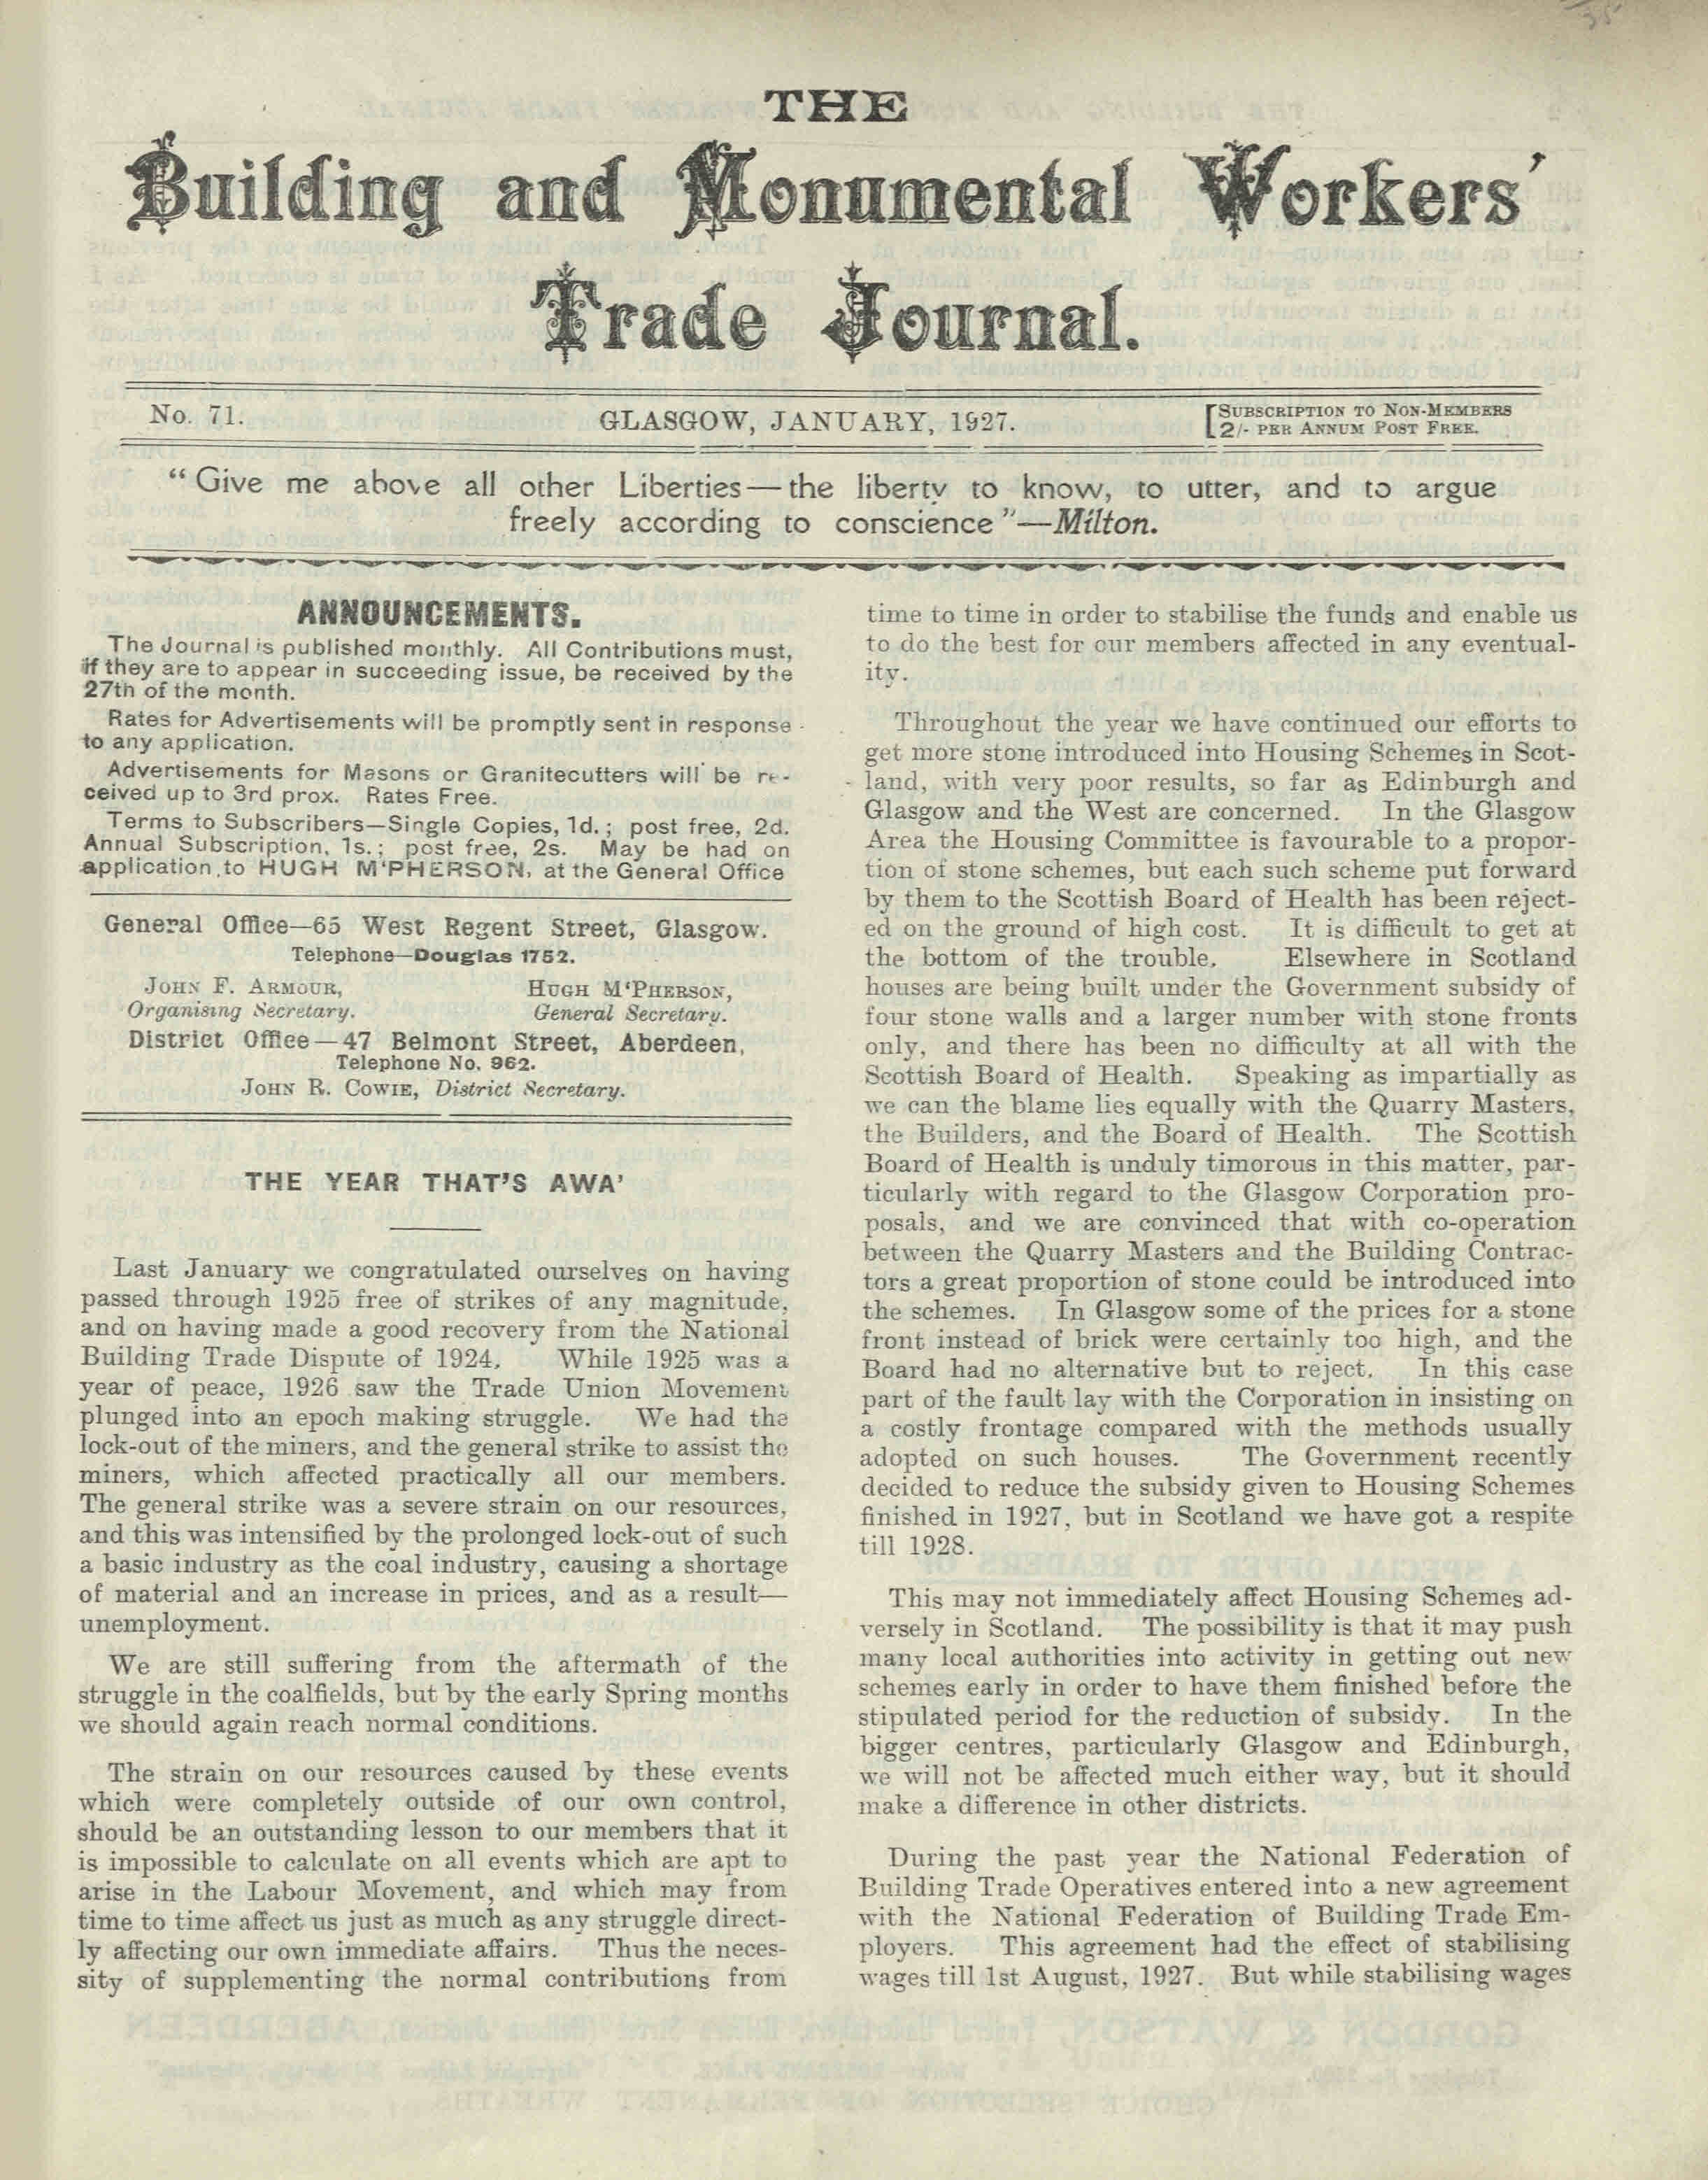 First page of The Building and Monumental Workers' Trade Journal, January 1927